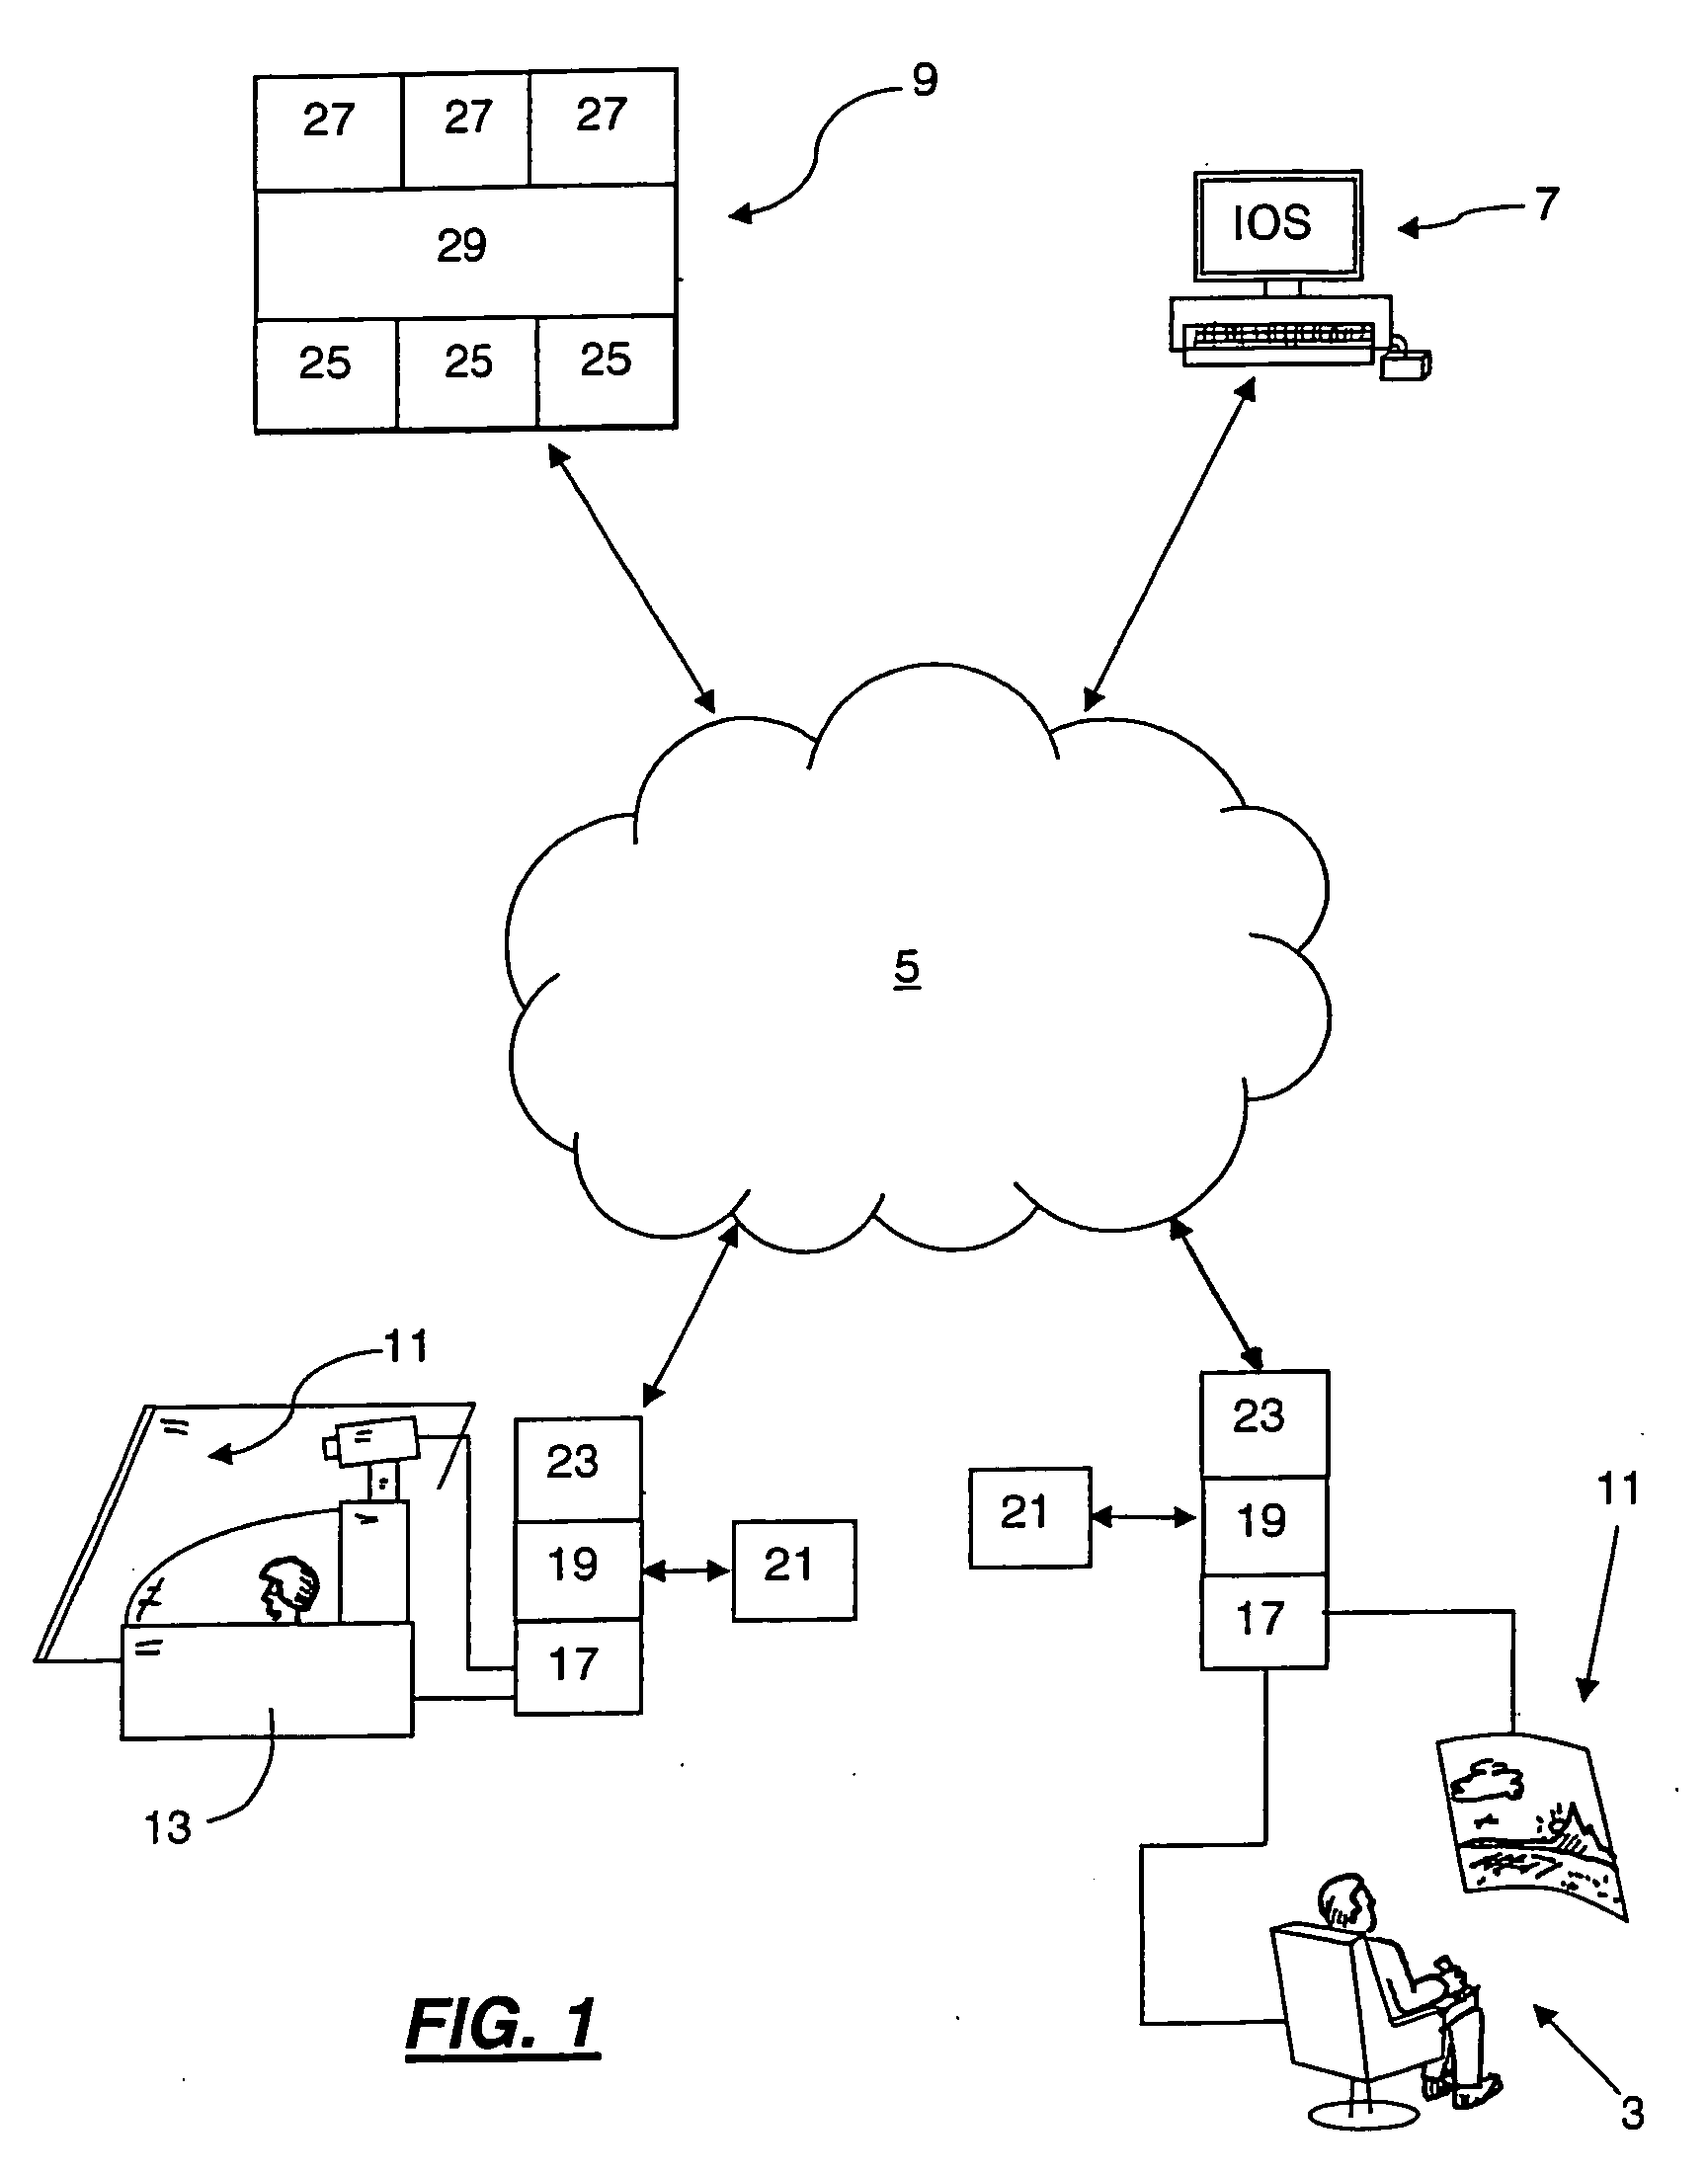 Distributed Physics Based Training System and Methods